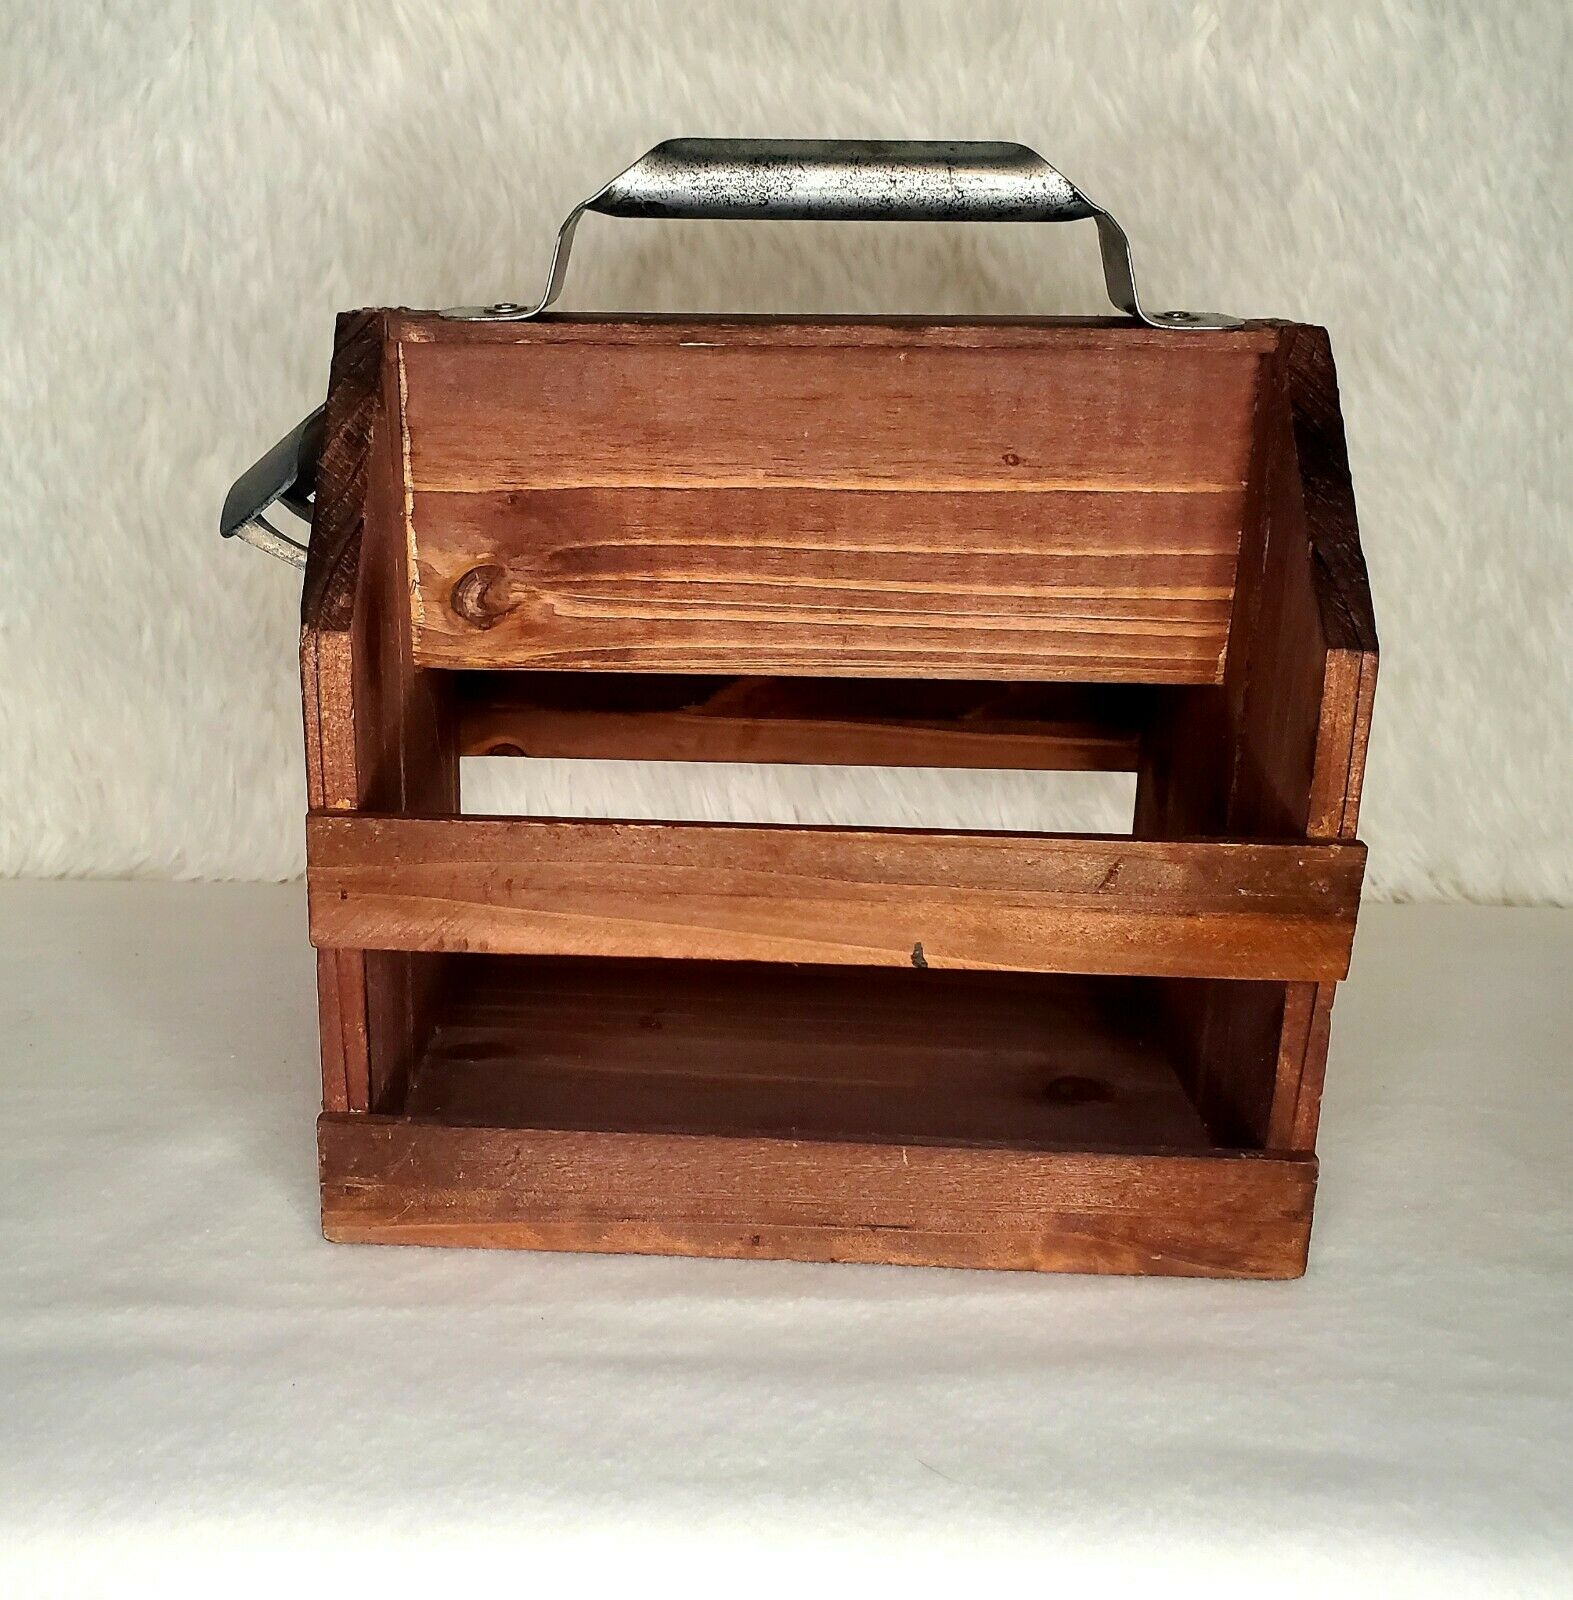 Wooden Beer & Condiment Holder W/ Bottle Opener Picnic, Pool - Rustic Hand Made